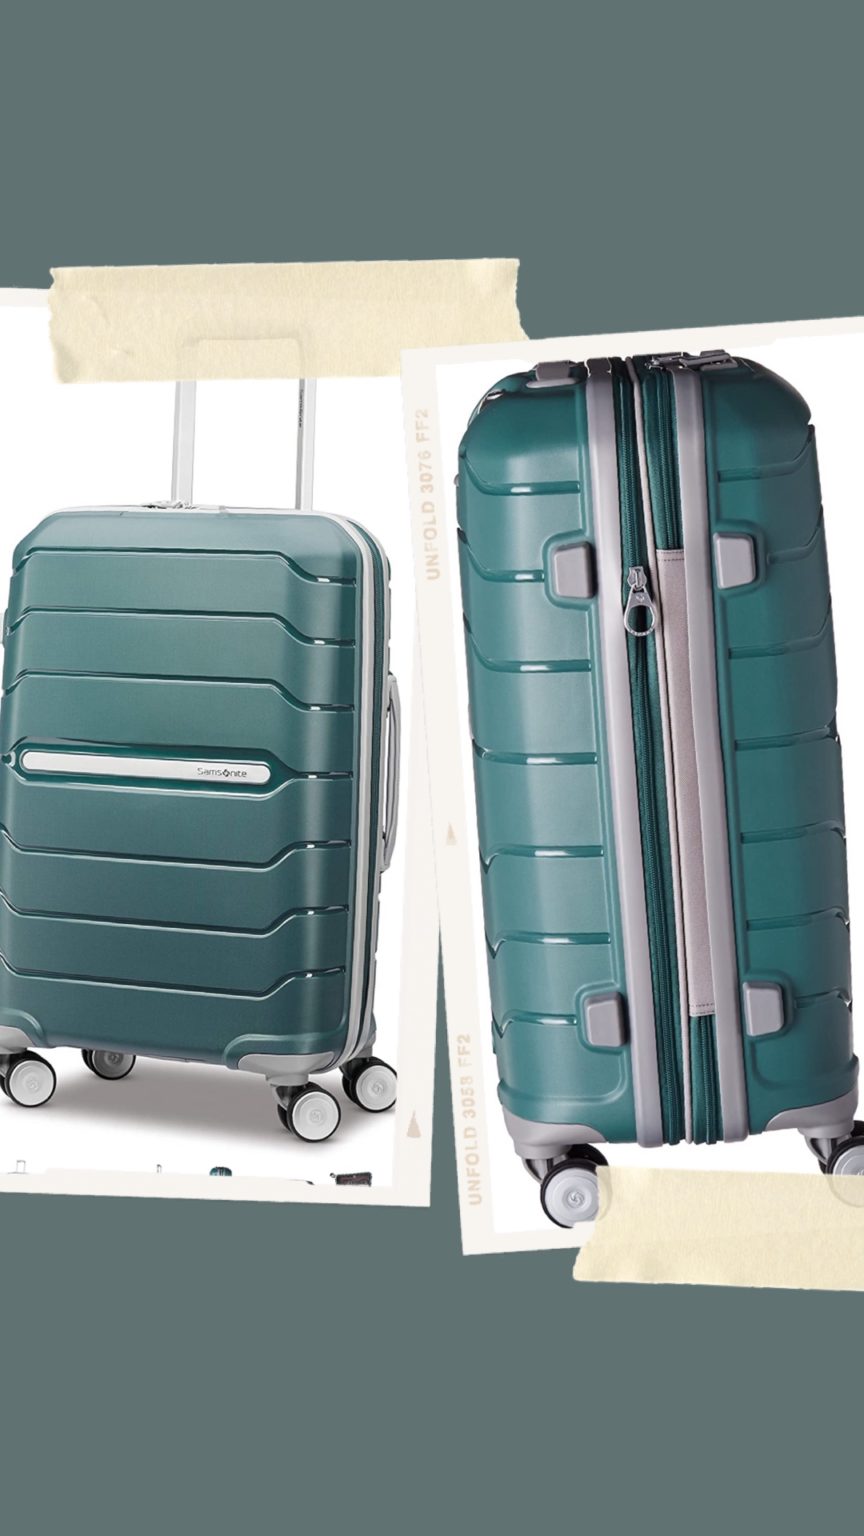 Top 10 Black Friday Deals for Travel Accessories and Luggage · D-RAVEL